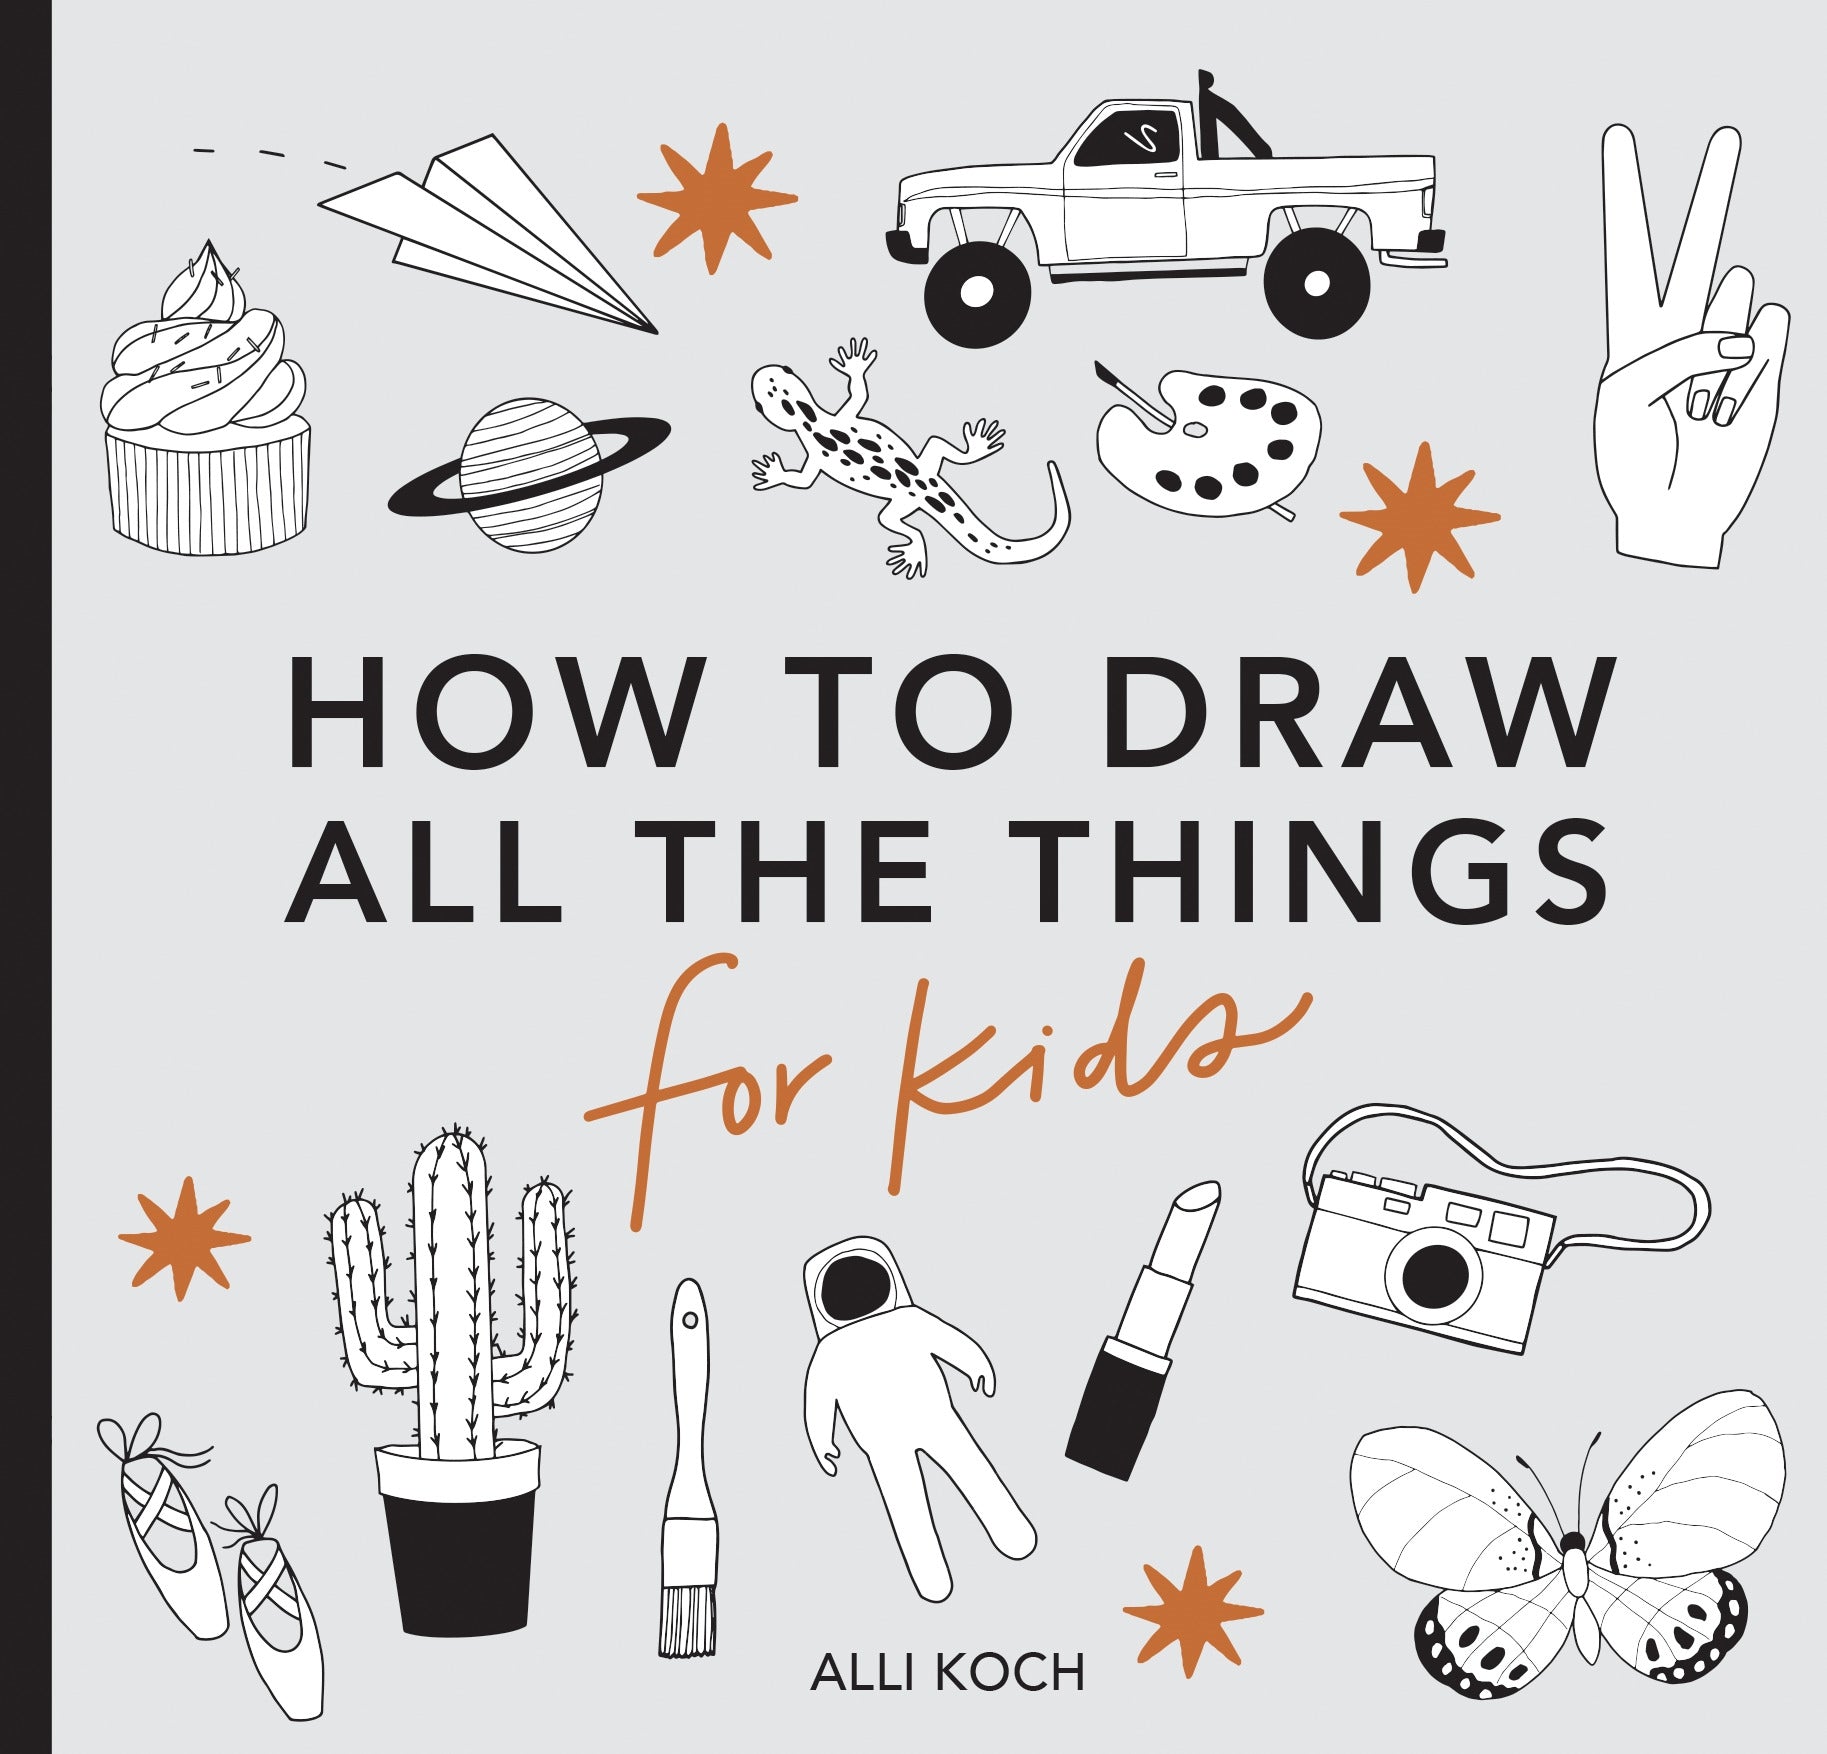 How to Draw: All the Things - for kids